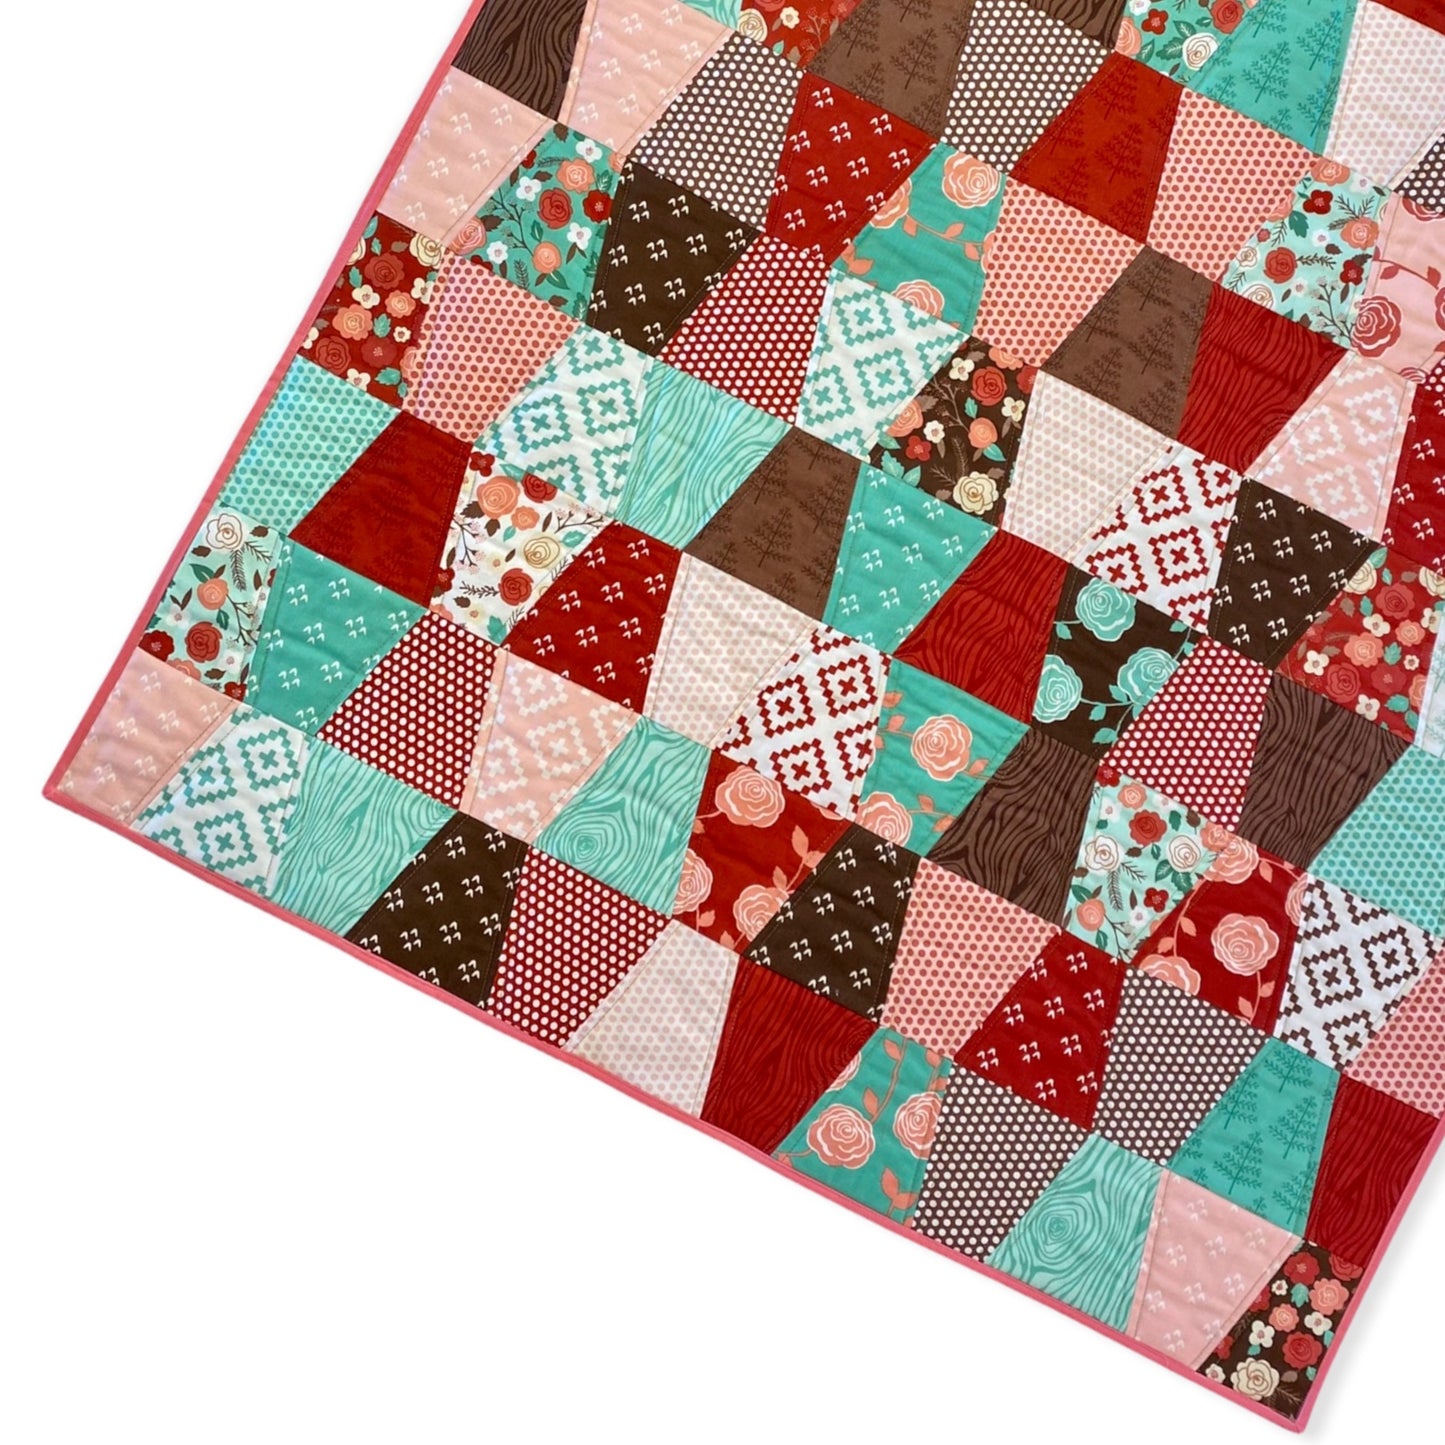 Baby Quilt -   flower/forest themed